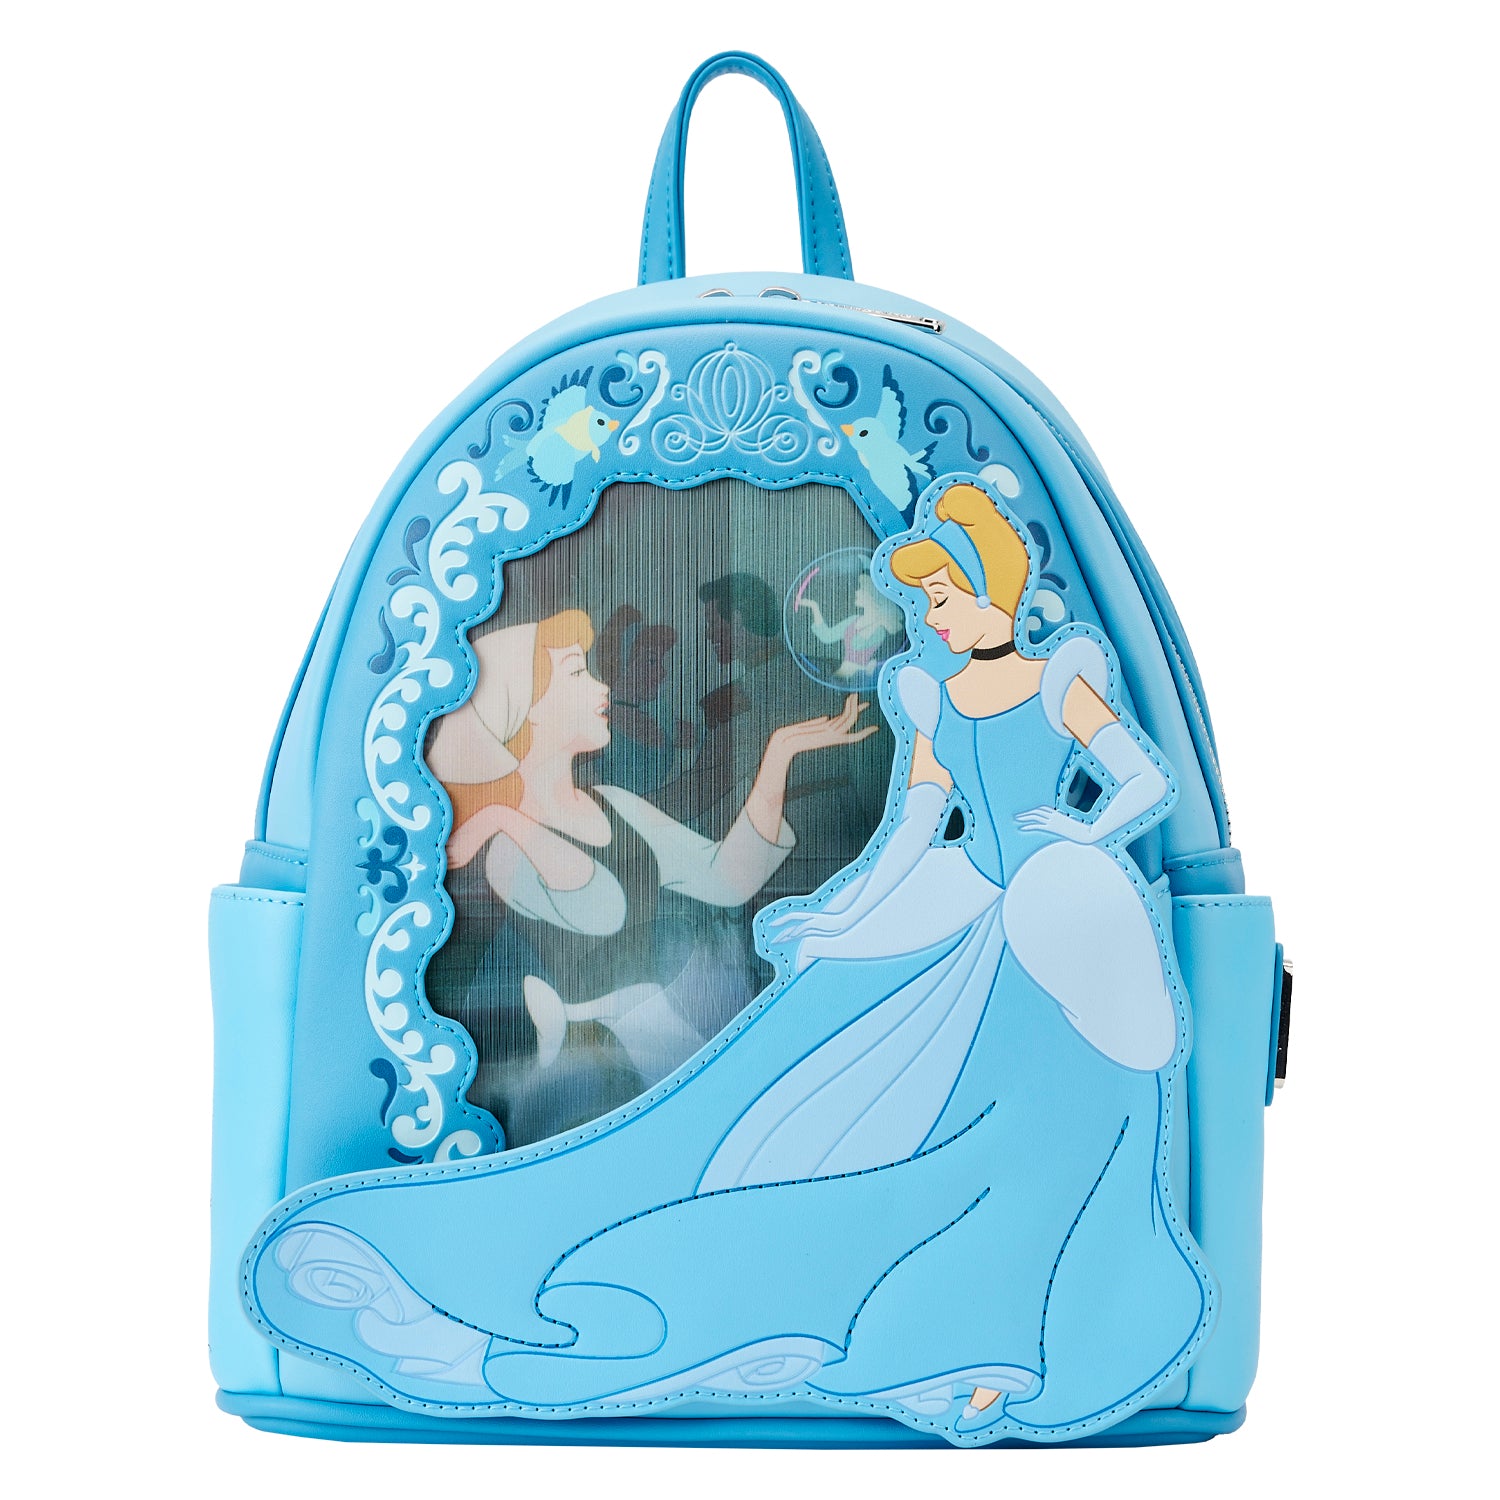 Make It Pink And Blue With The Sleeping Beauty Castle Series Loungefly  Collection! - bags 